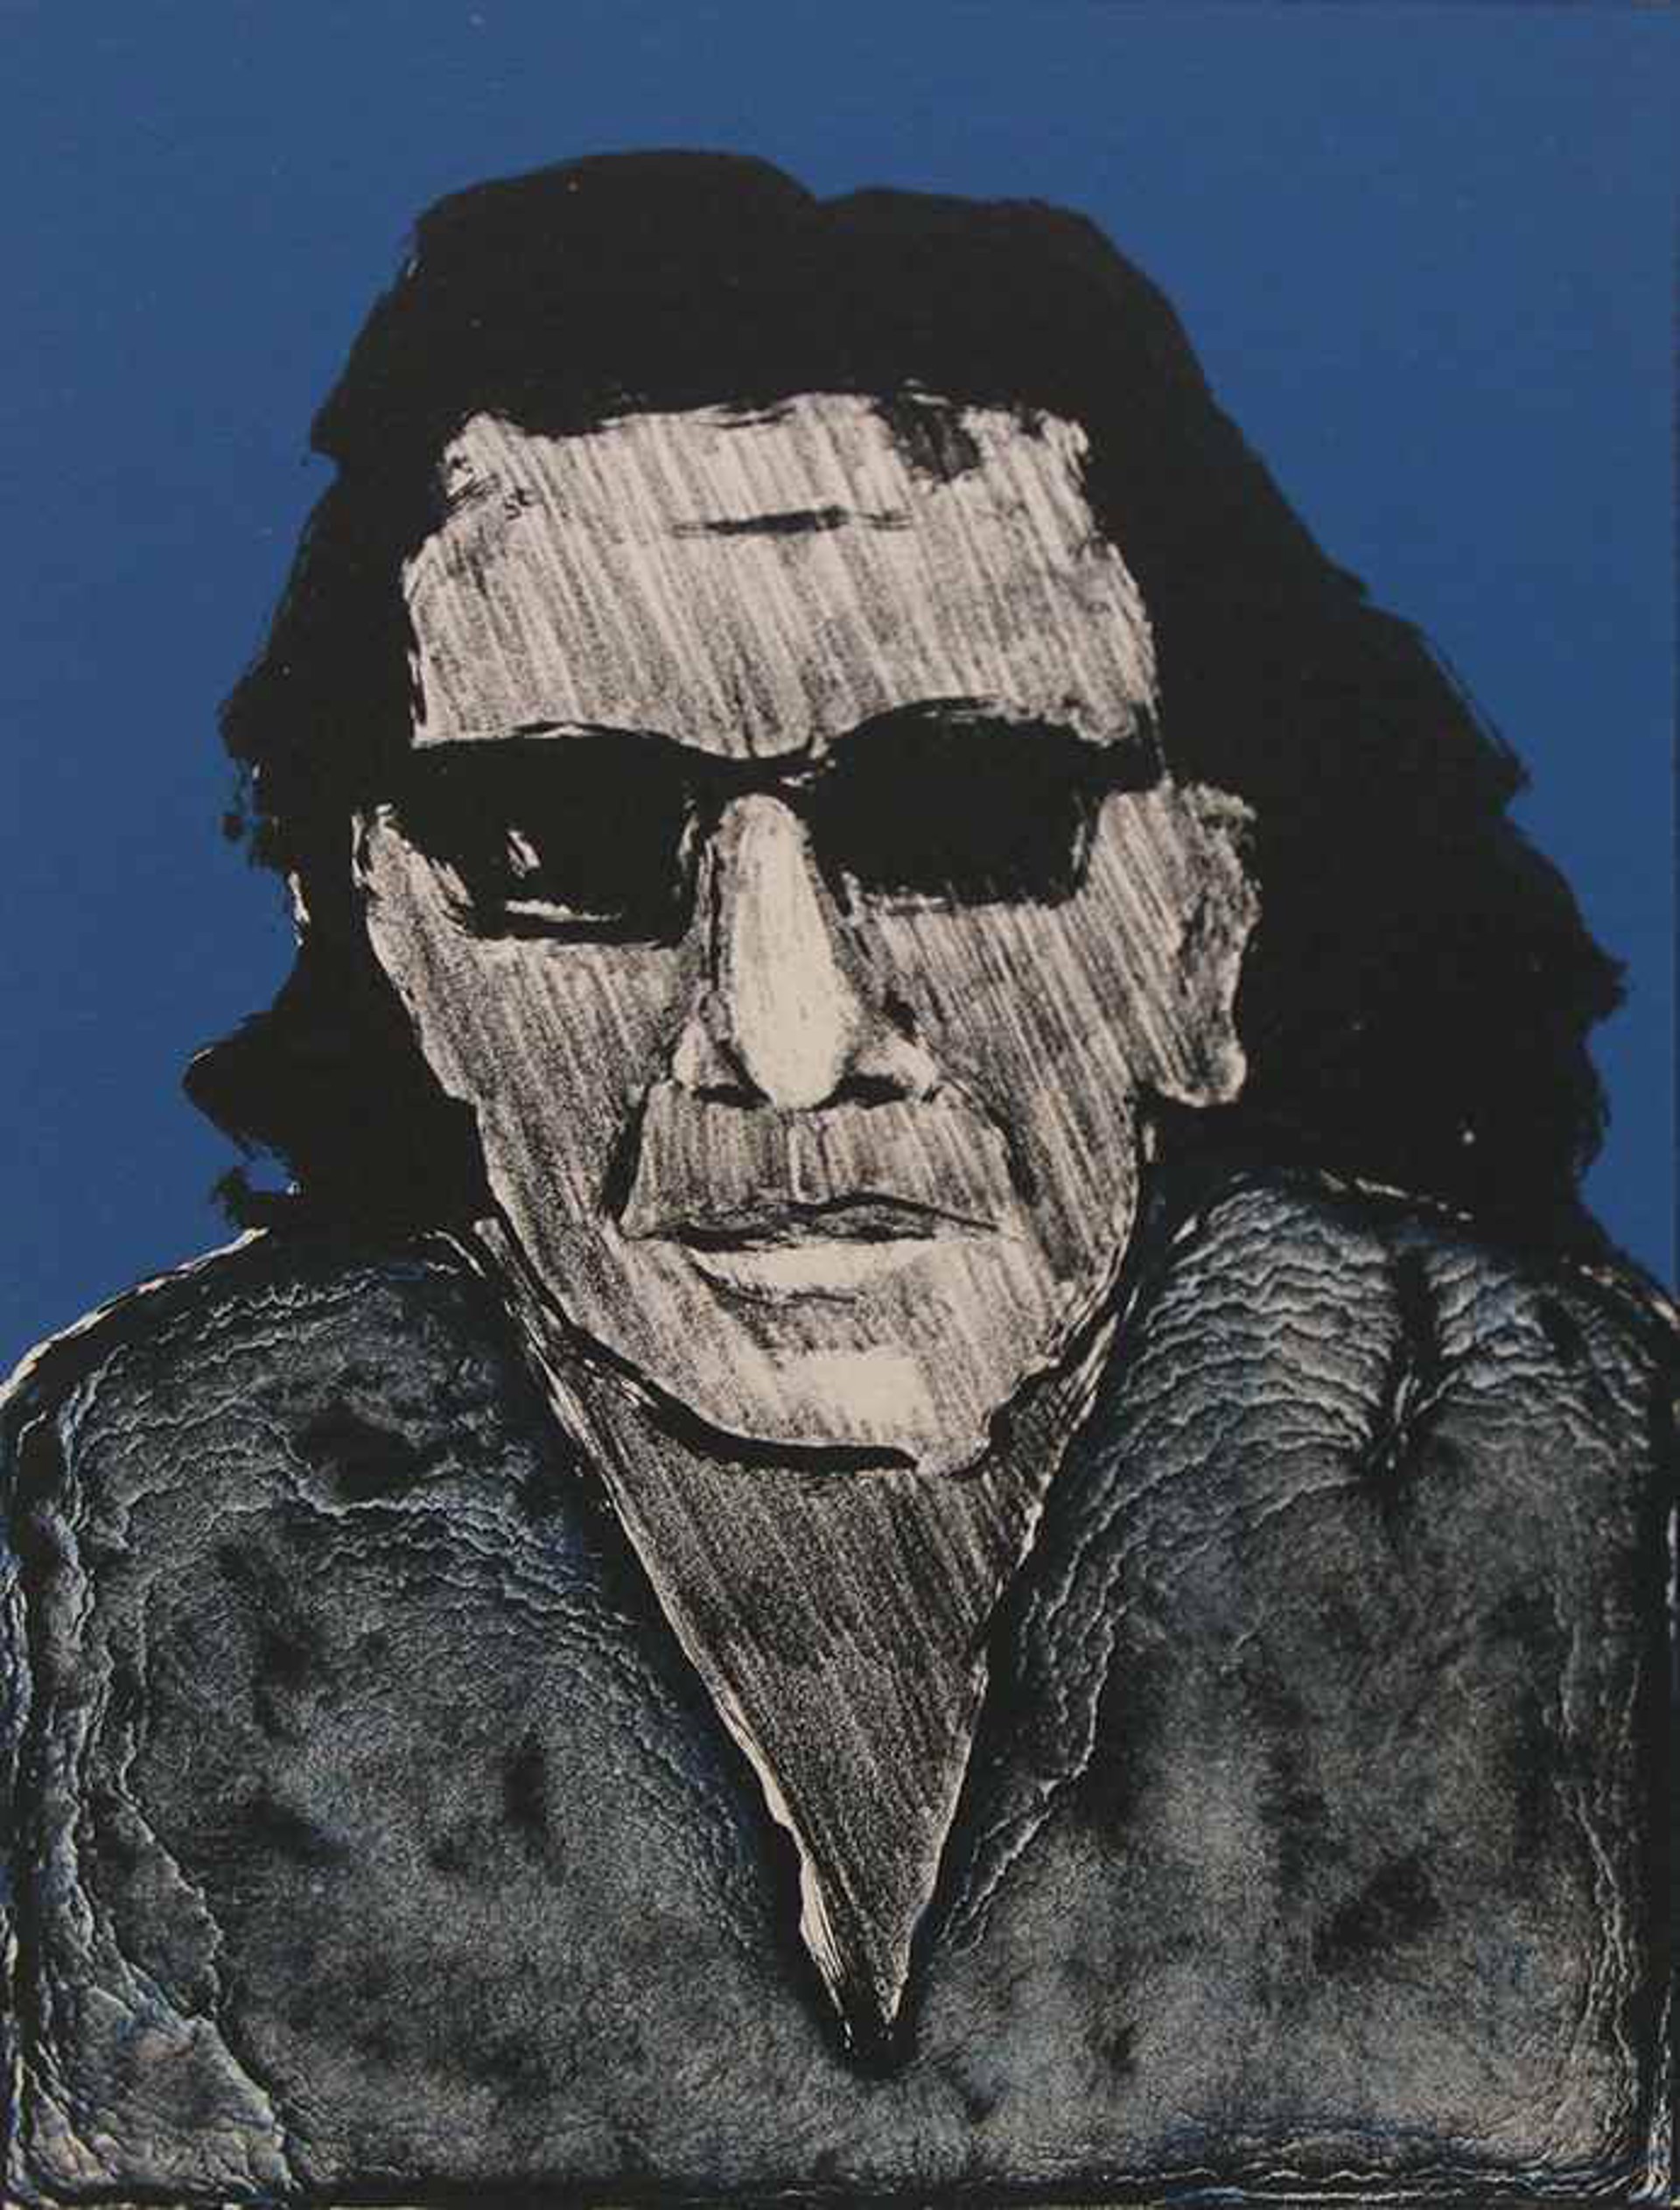 Self-portrait with Dark Glasses (First State), Ed. 17/100 by Fritz Scholder